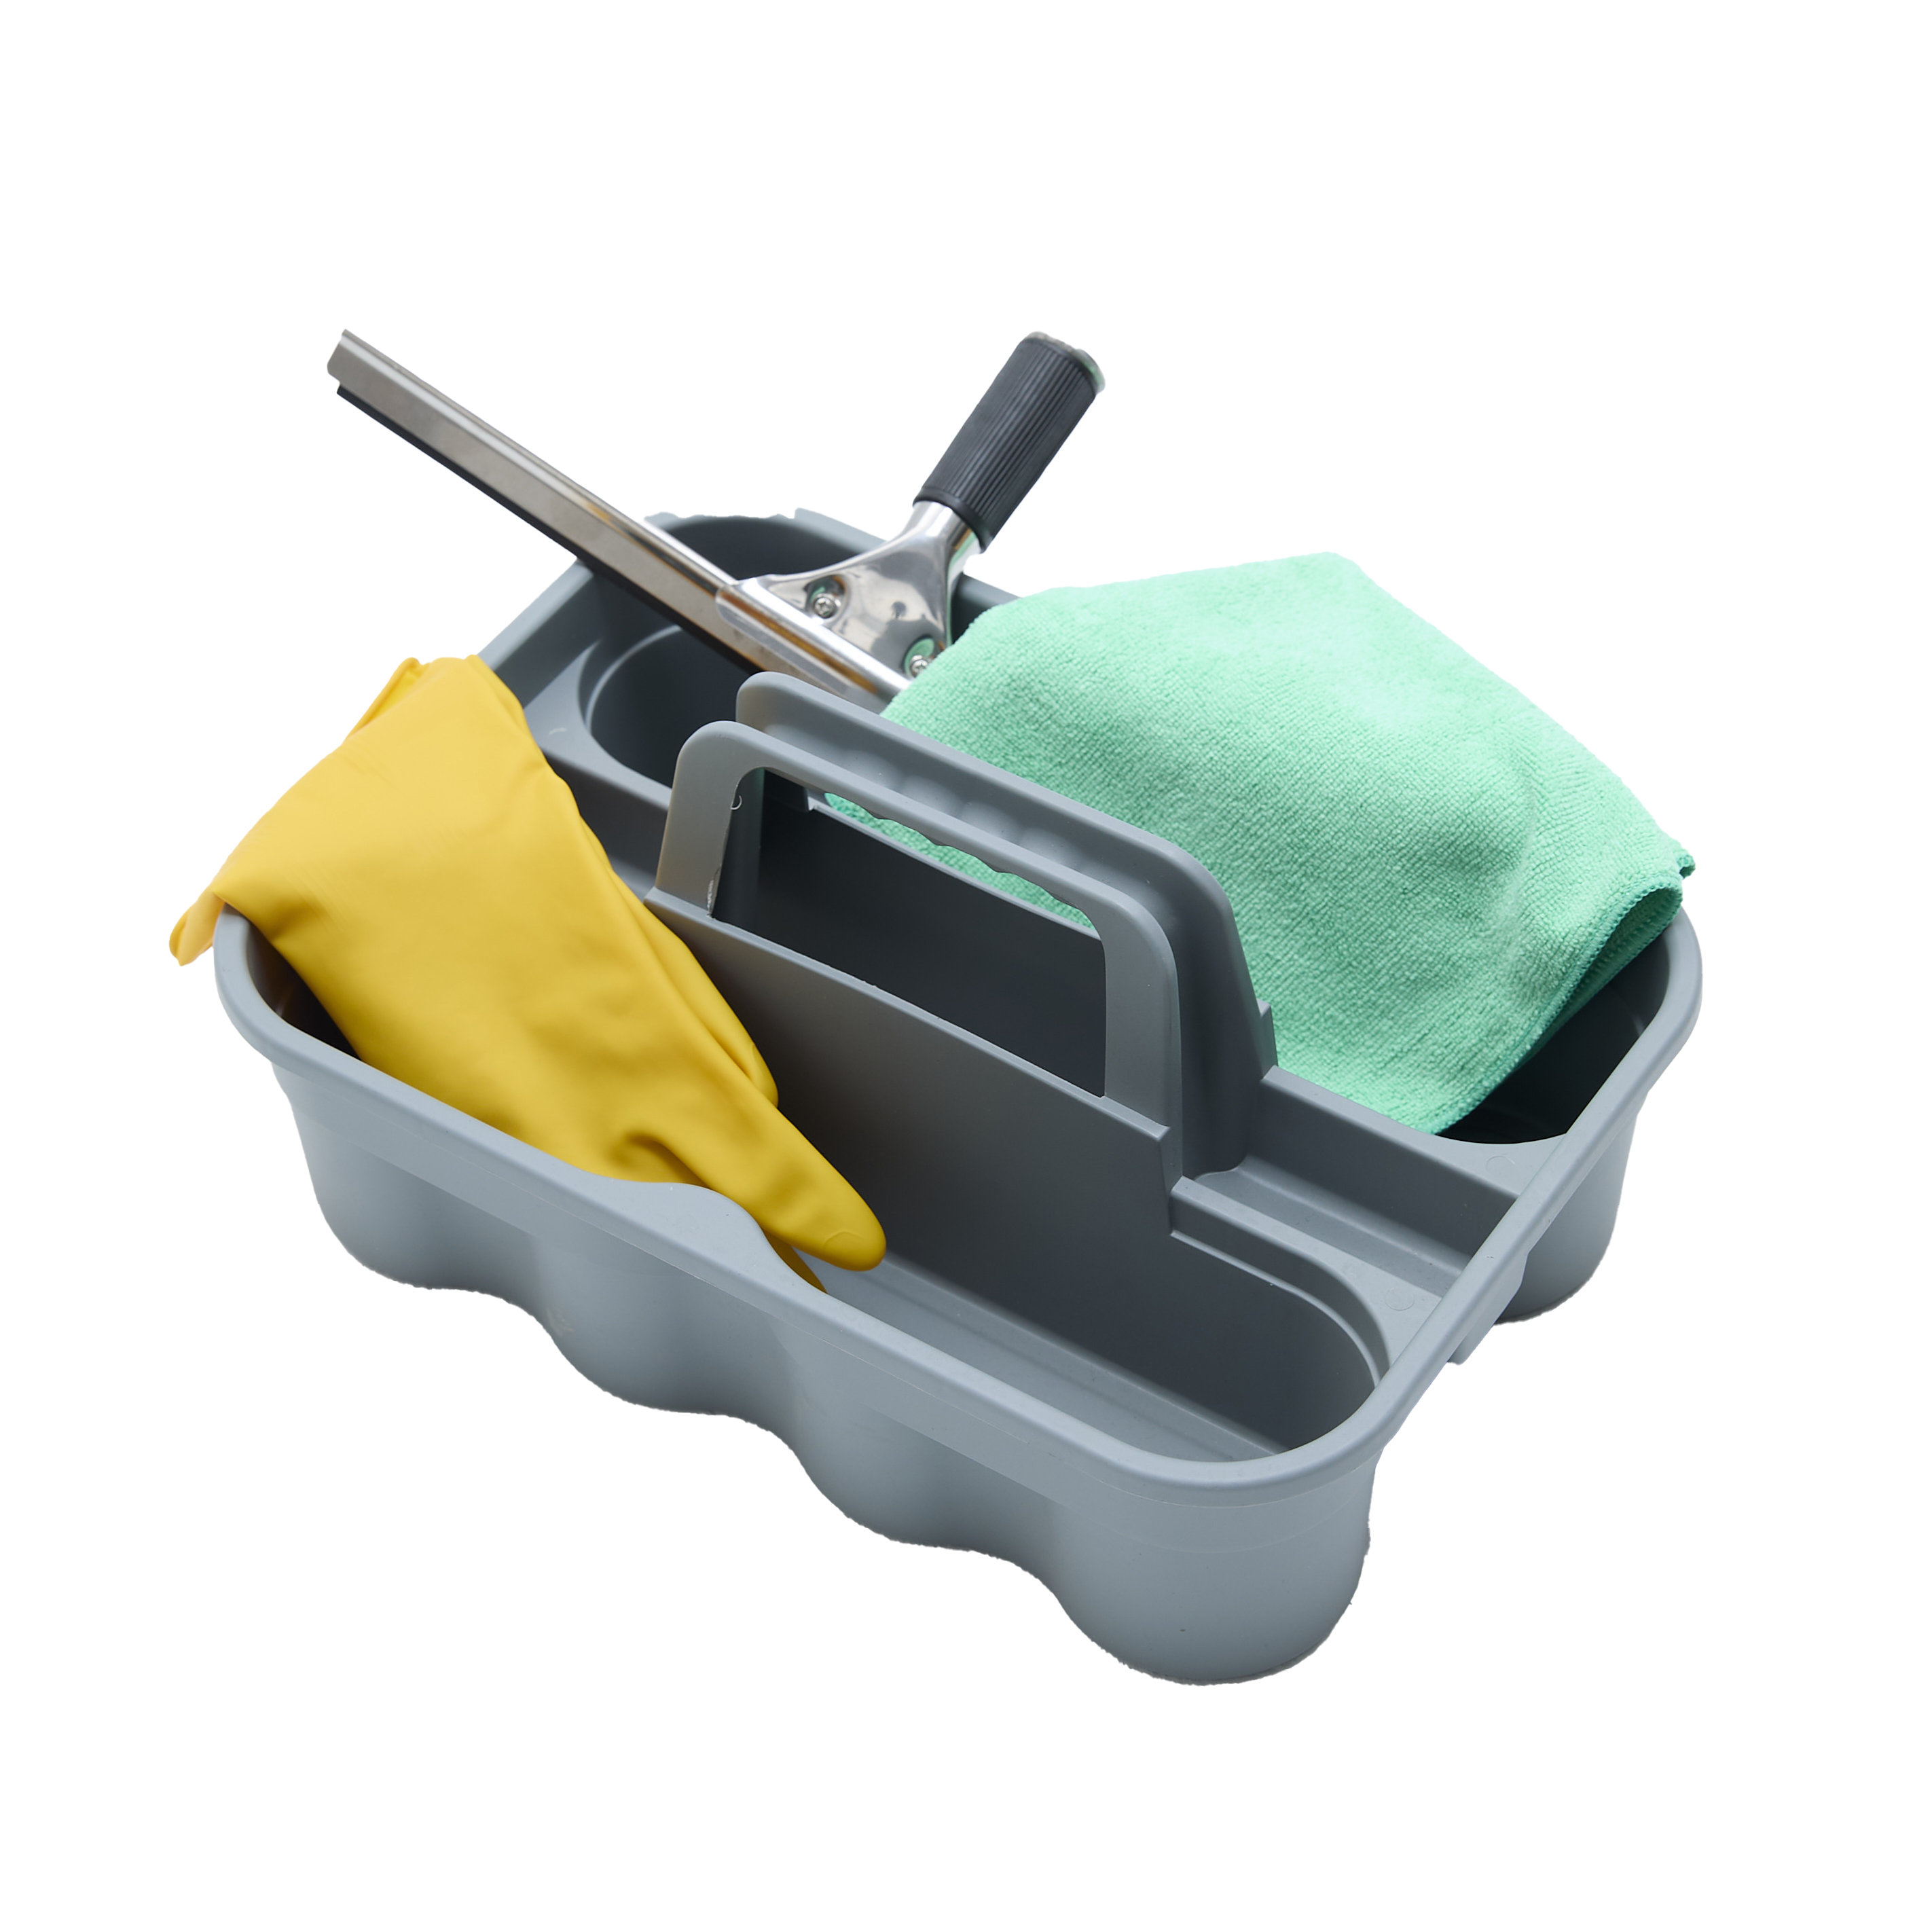 Cleaning Tool Box